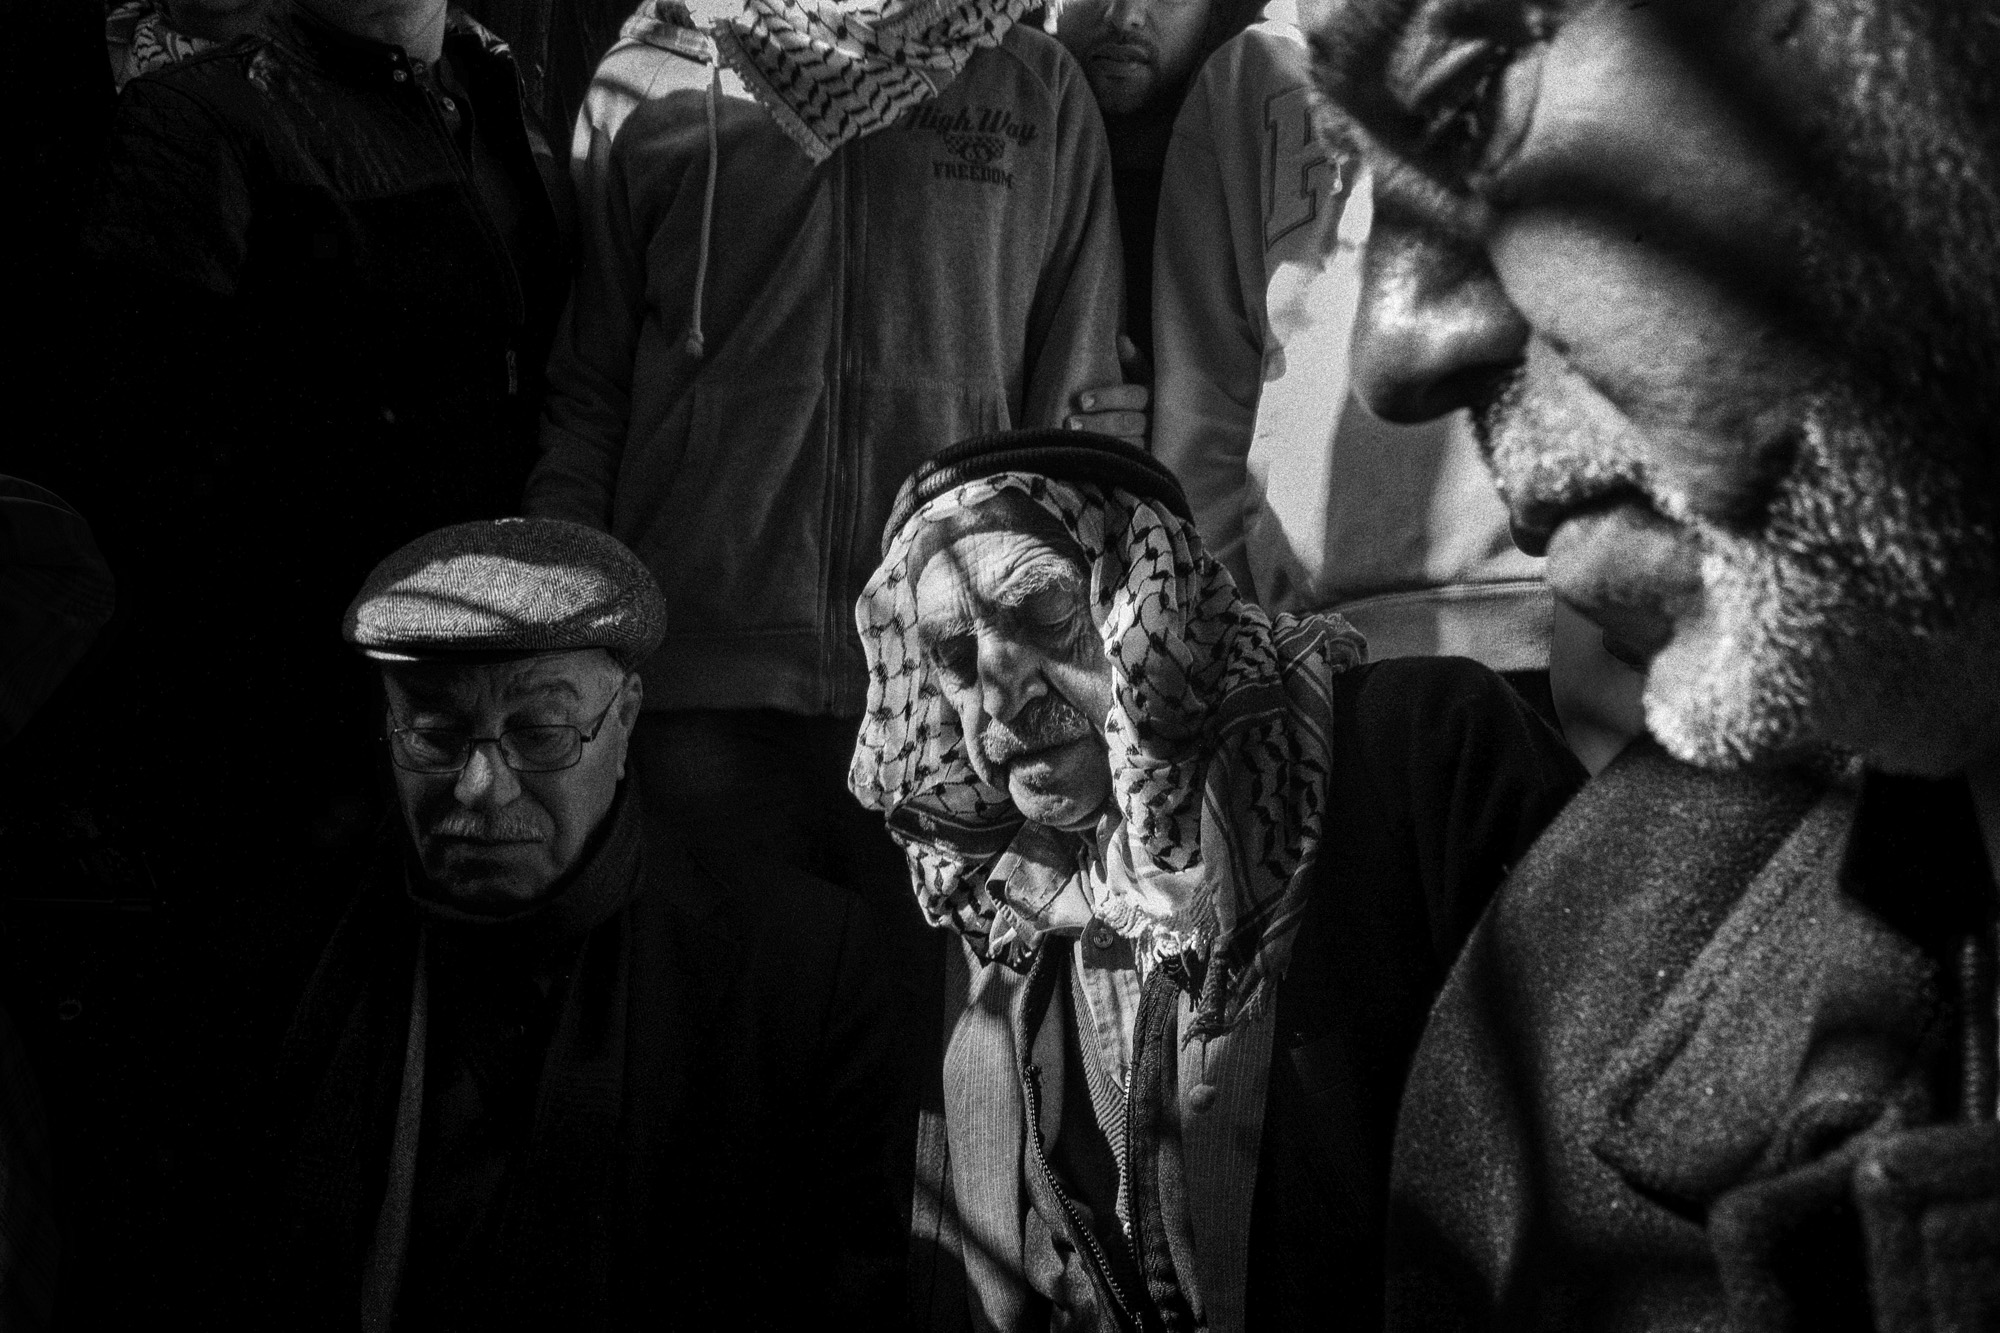 Family members attend the funeral of Shadi Arafa in Hebron, November 2015. Israel's Ministry of Foreign Affairs stated Arafa, a Palestinian mobile phone salesman, was killed by Palestinian gunfire during an attack in Gush Etzion, between Hebron and Jerusalem, but noted that official Palestinian sources said he was killed by Israeli forces.